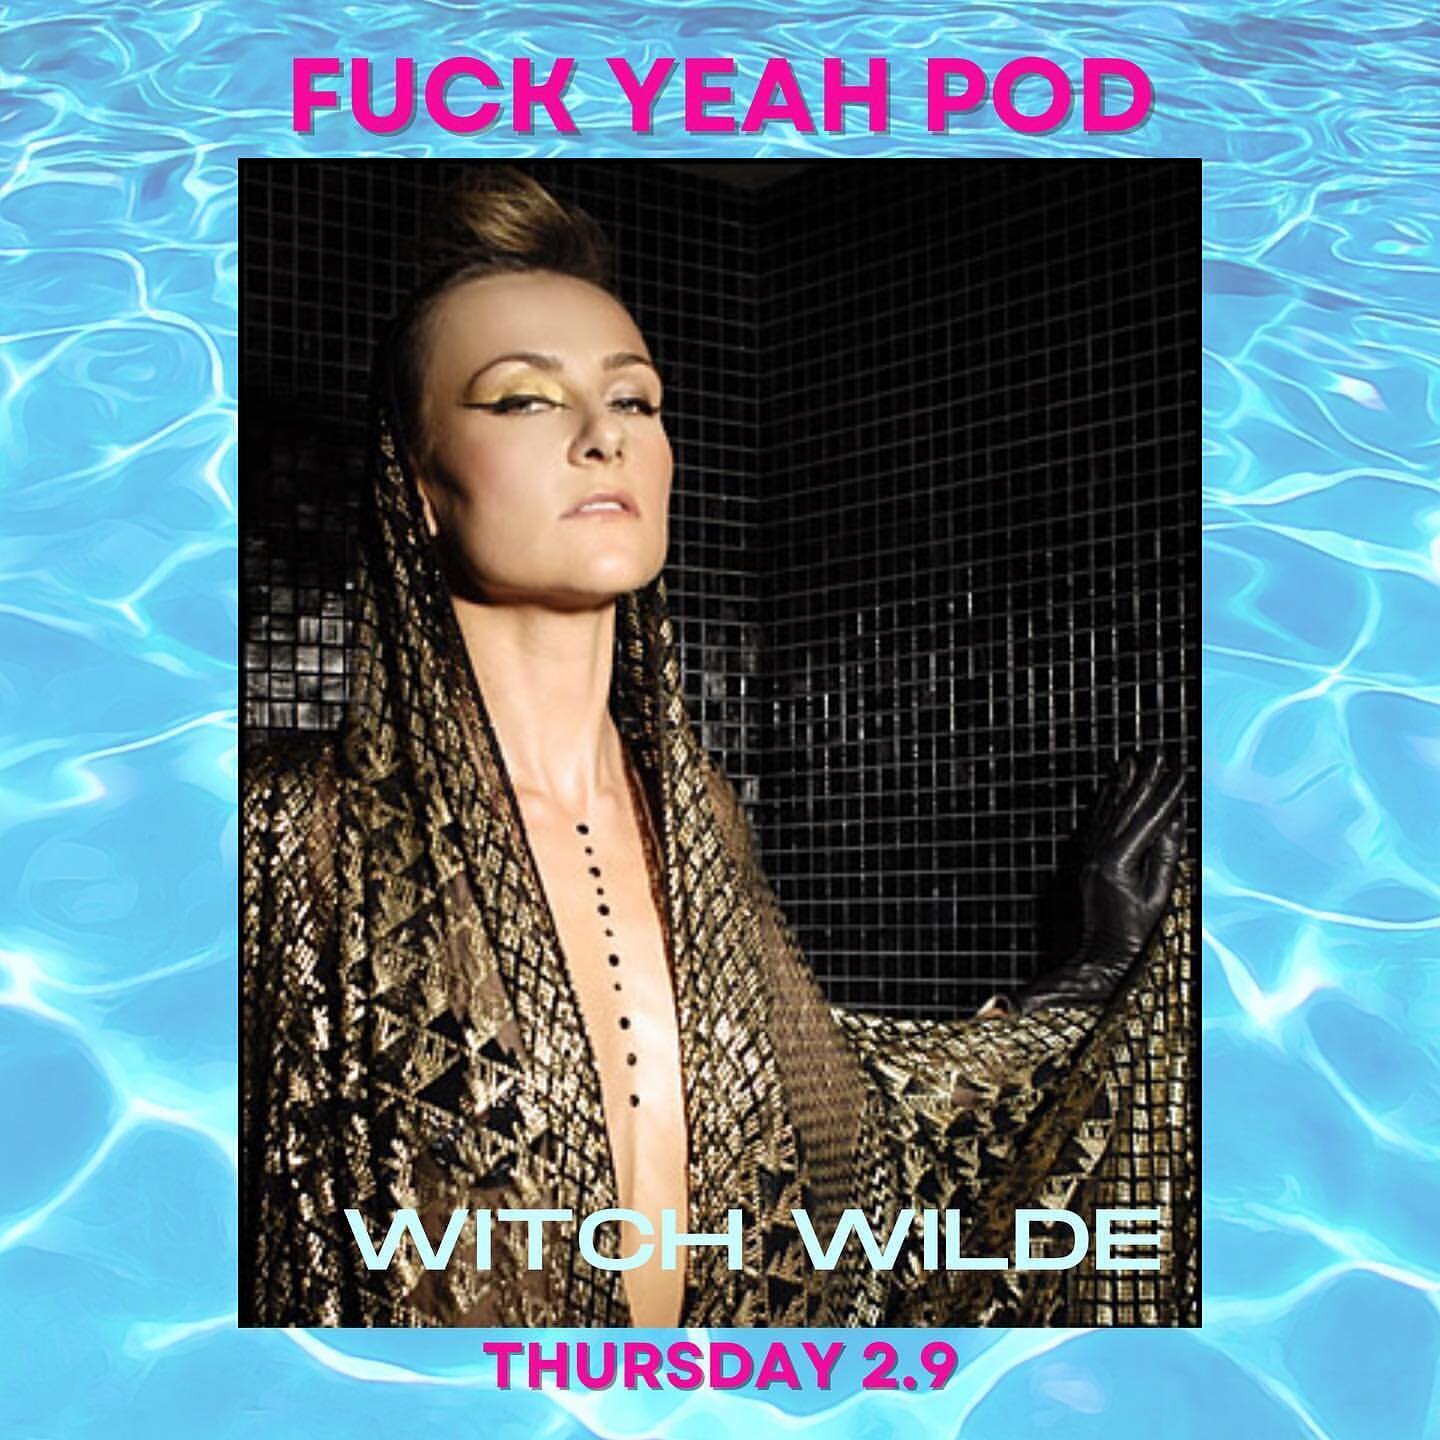 For our season finale, we are joined by Witch Wilde, who introduces us to Sex Magix theories. She shares how to direct sexual energy towards manifesting your desires, increasing your vitality and connecting with the cosmos. She also guides us in an i